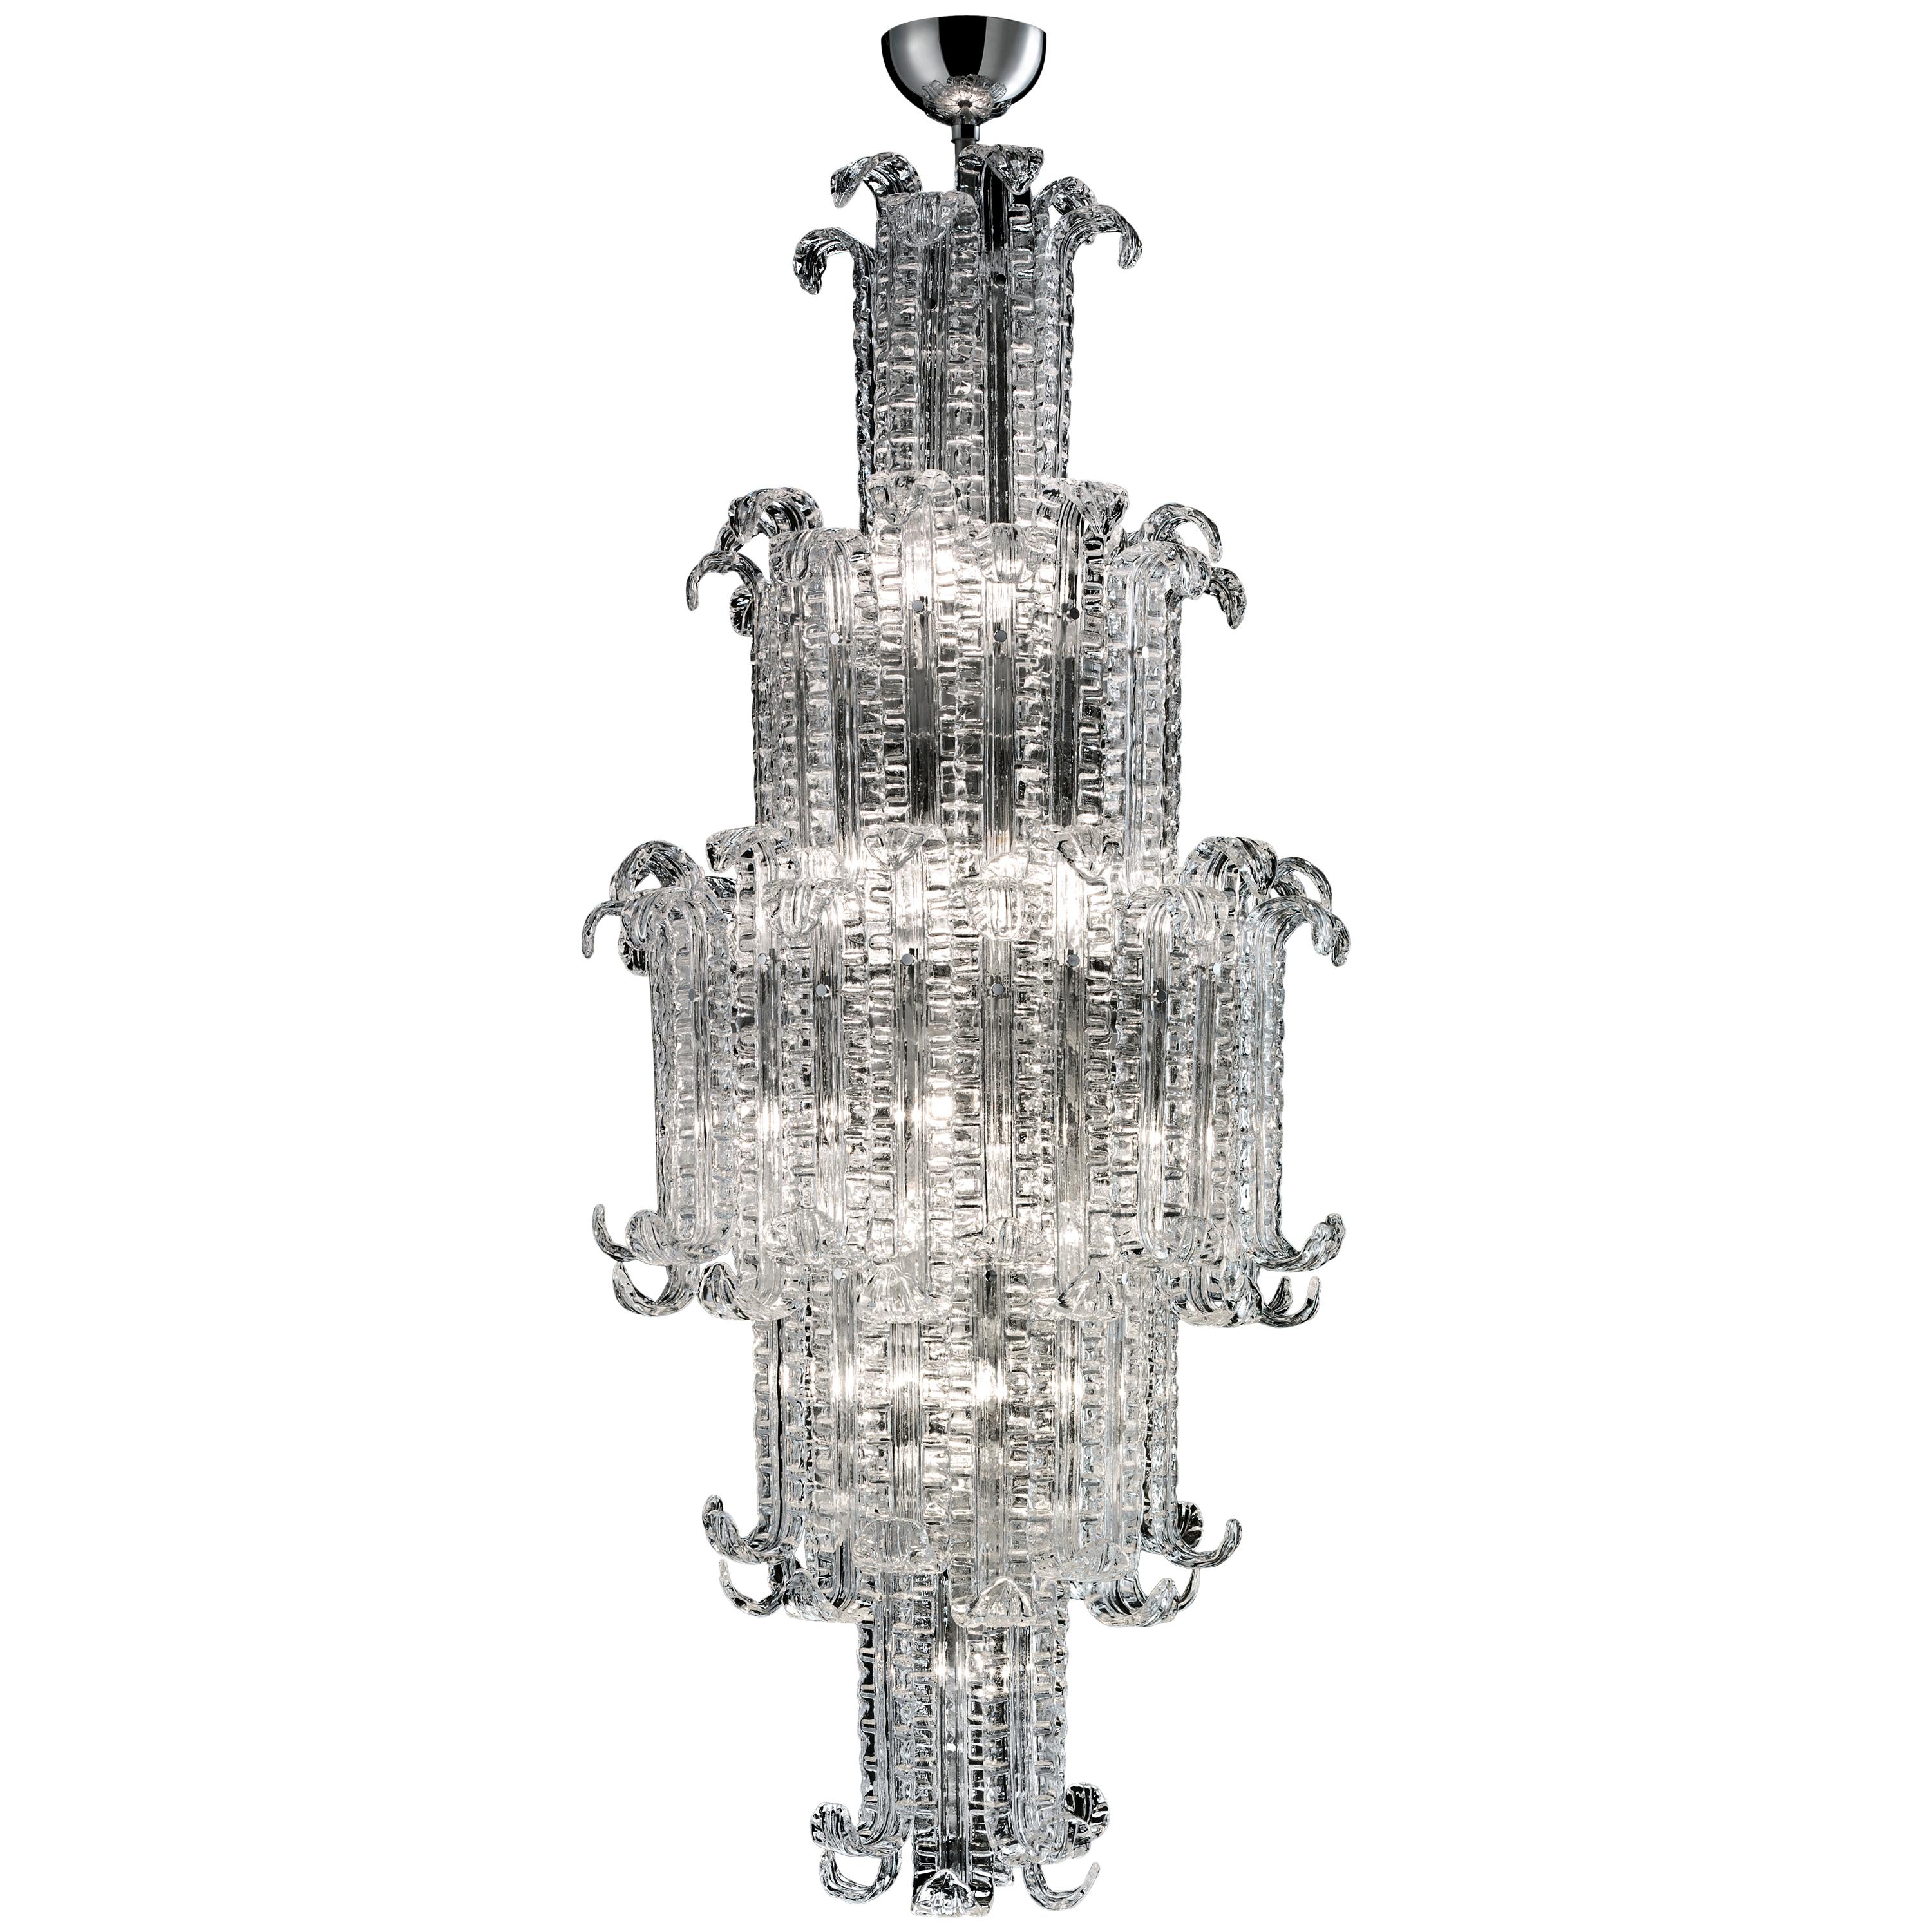 New Felci 7243 Suspension Lamp in Crystal Glass, by Barovier&Toso